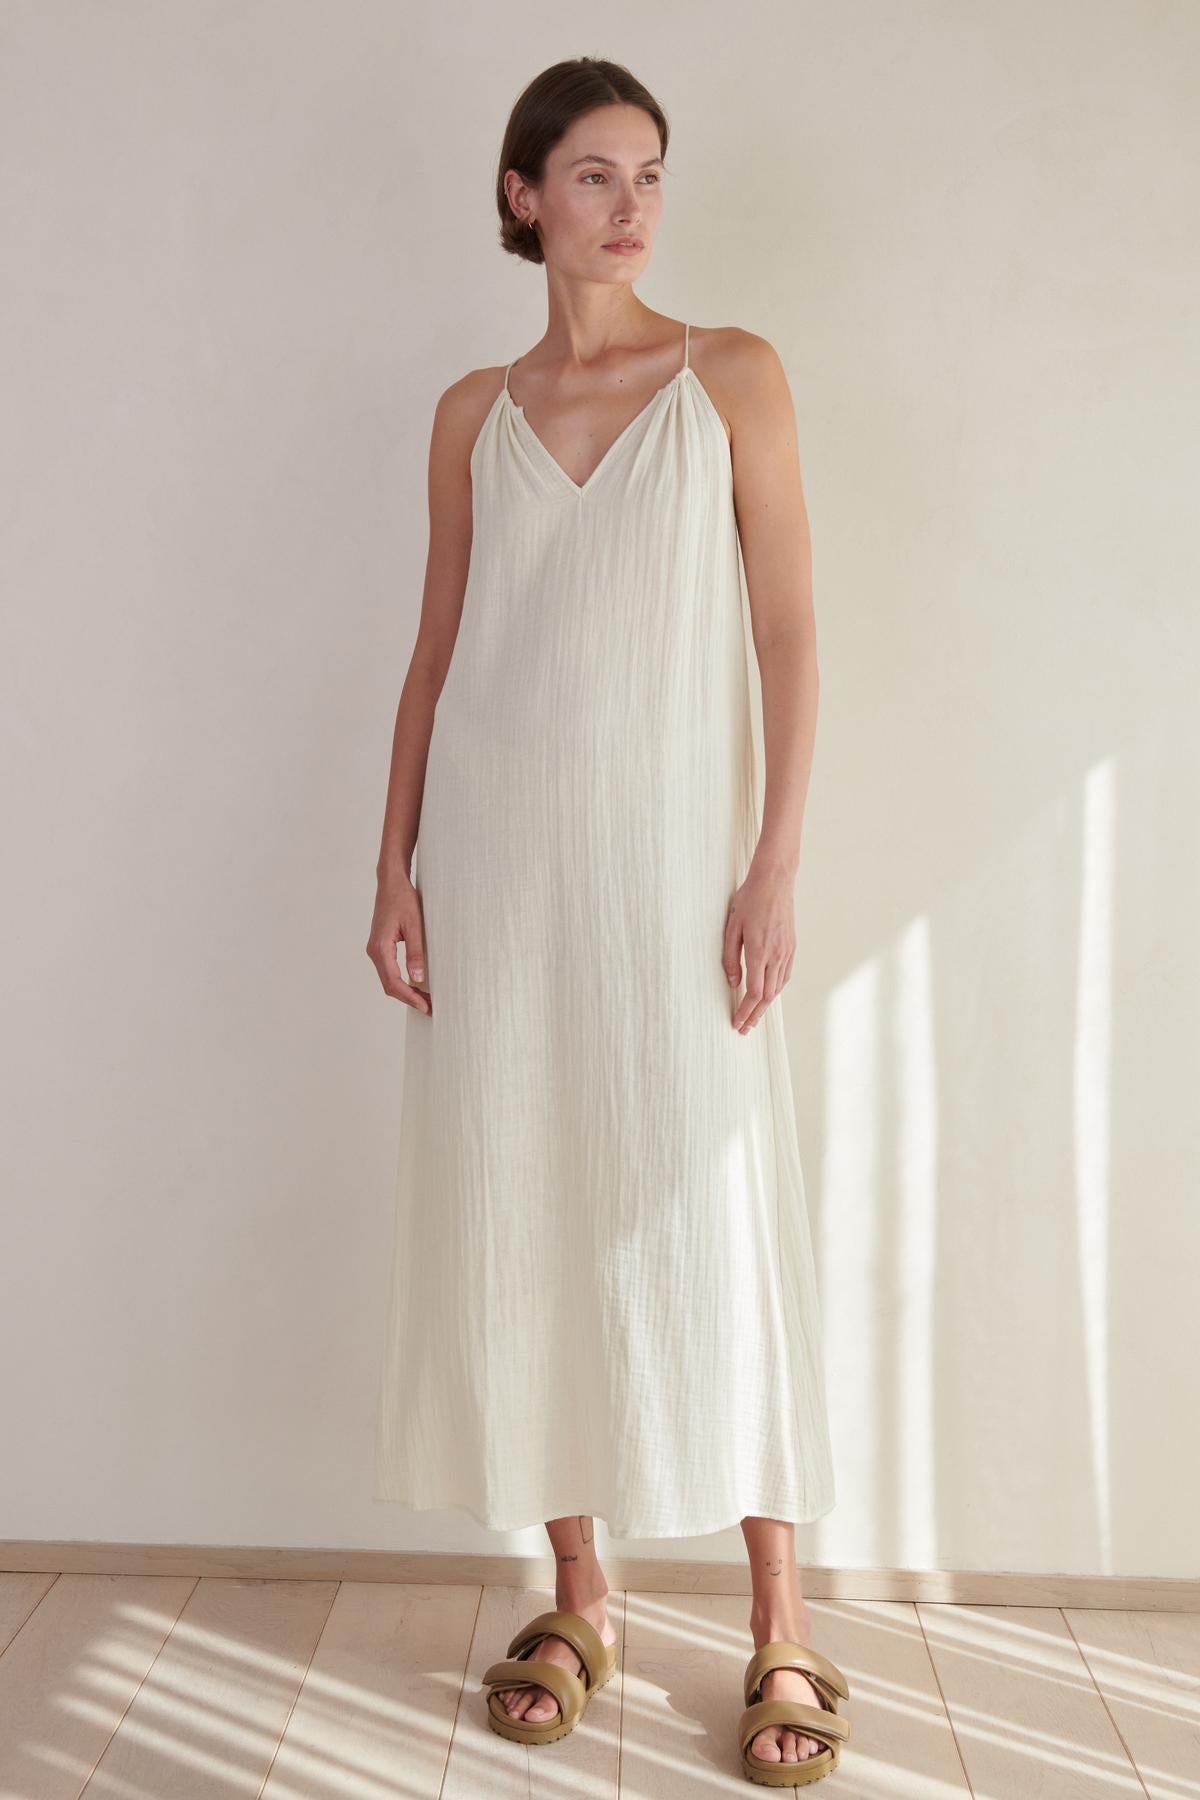 A woman in a long, white, sleeveless Carrillo dress stands in a room with soft lighting, wearing golden sandals by Velvet by Jenny Graham.-26293219754177